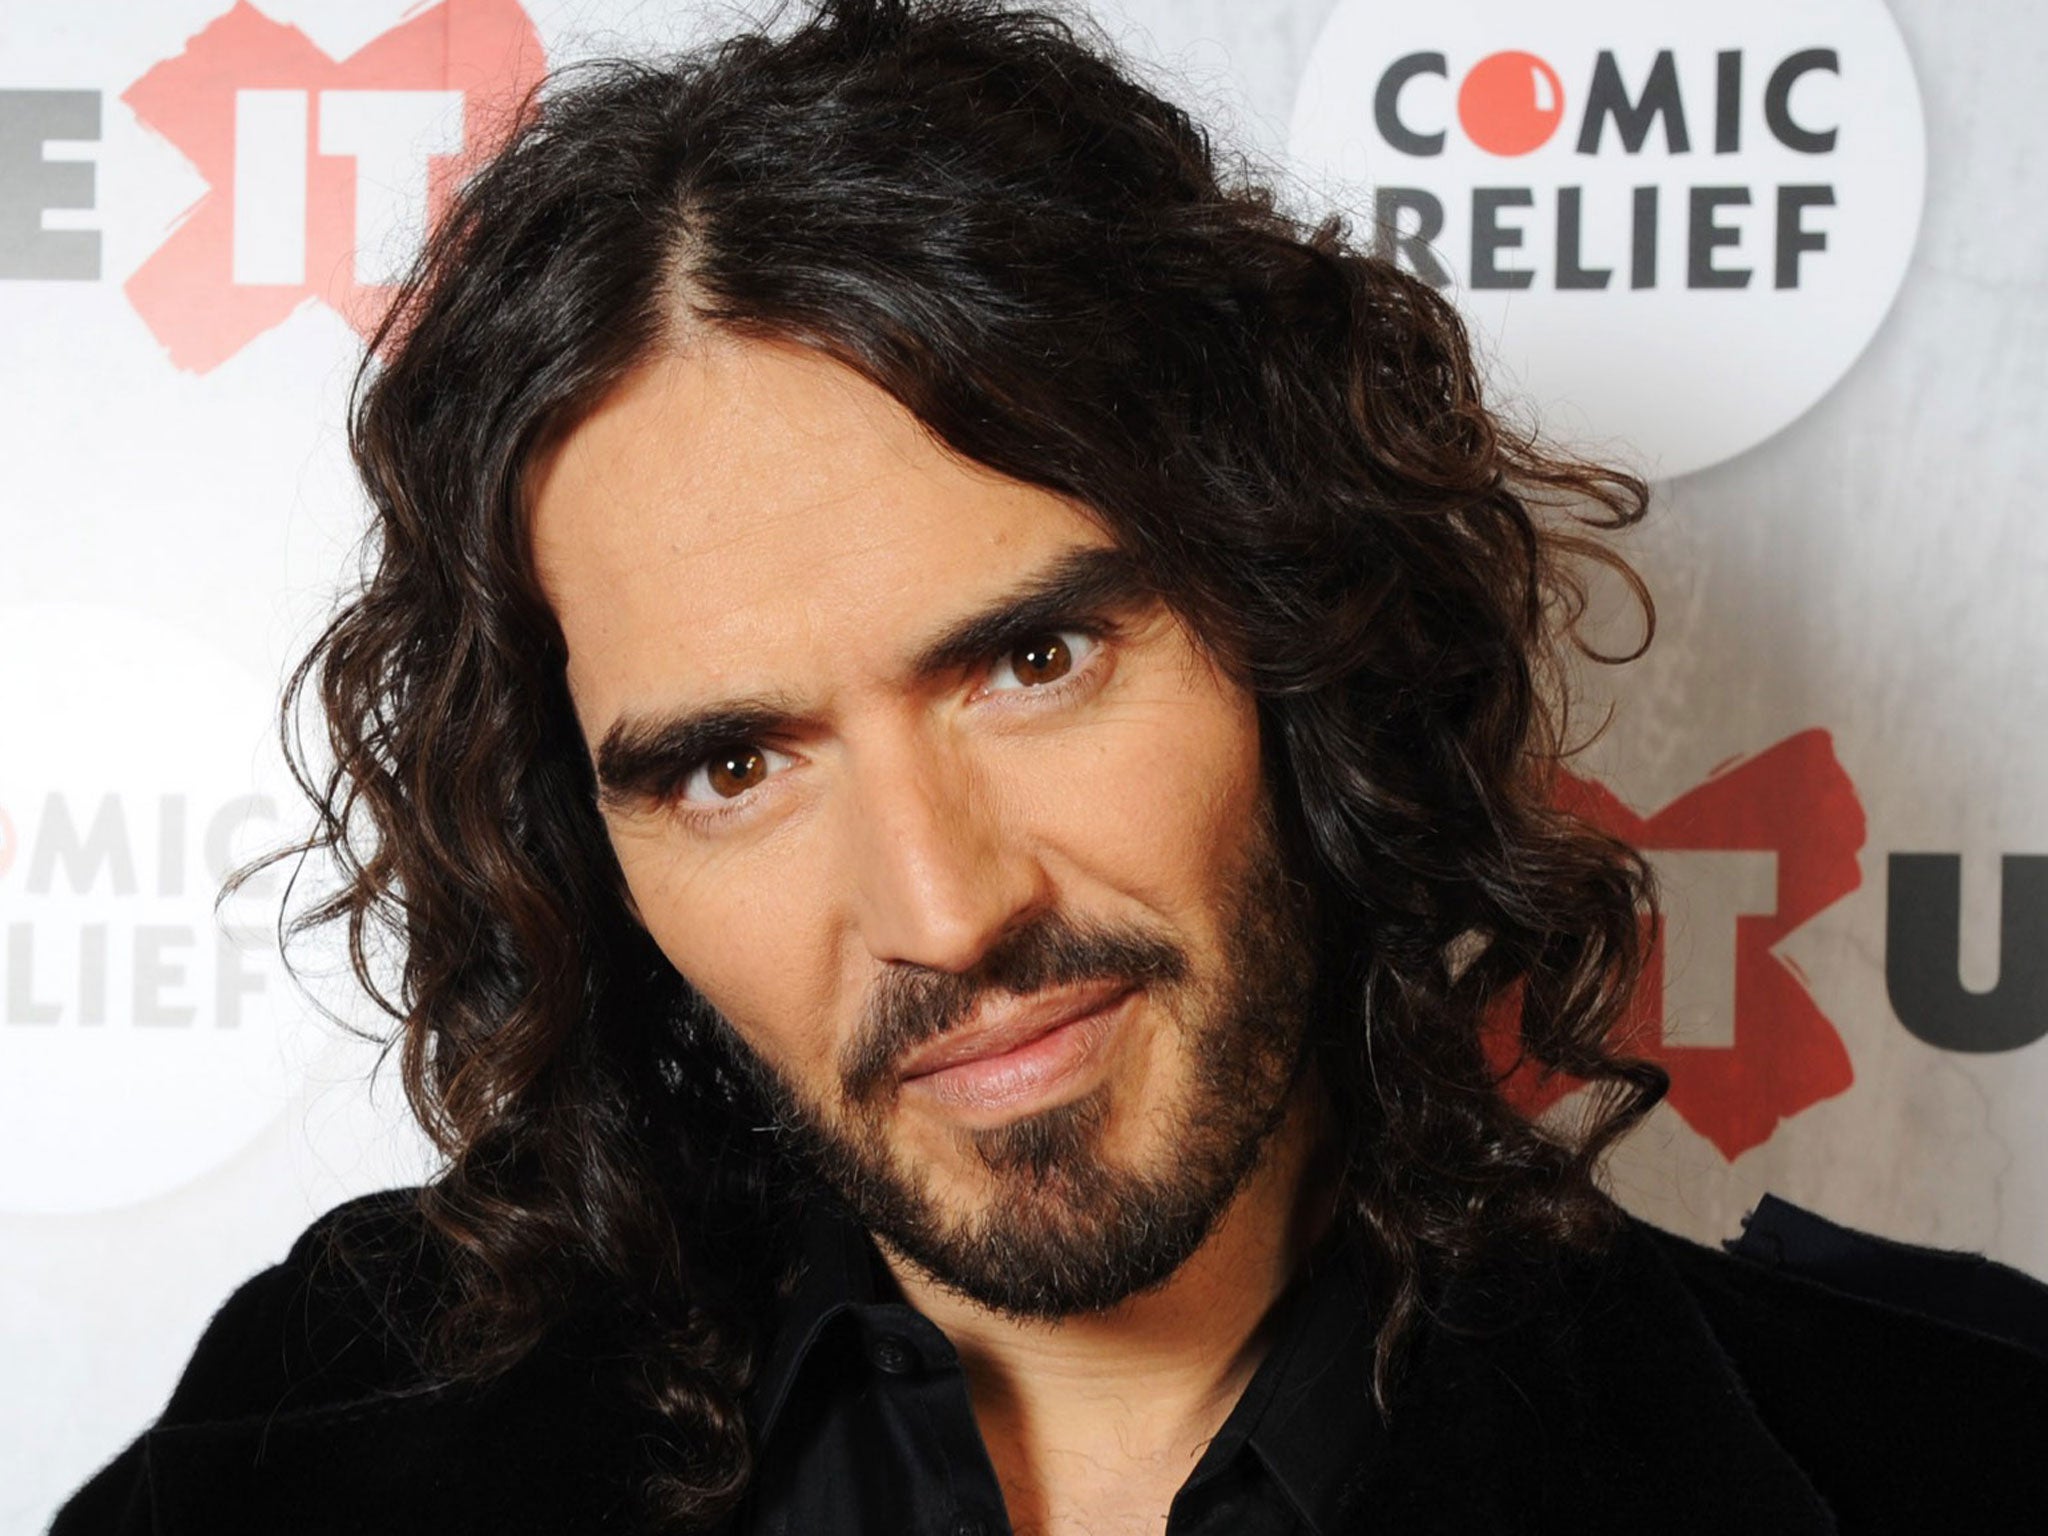 Something in the hair: Russell Brand